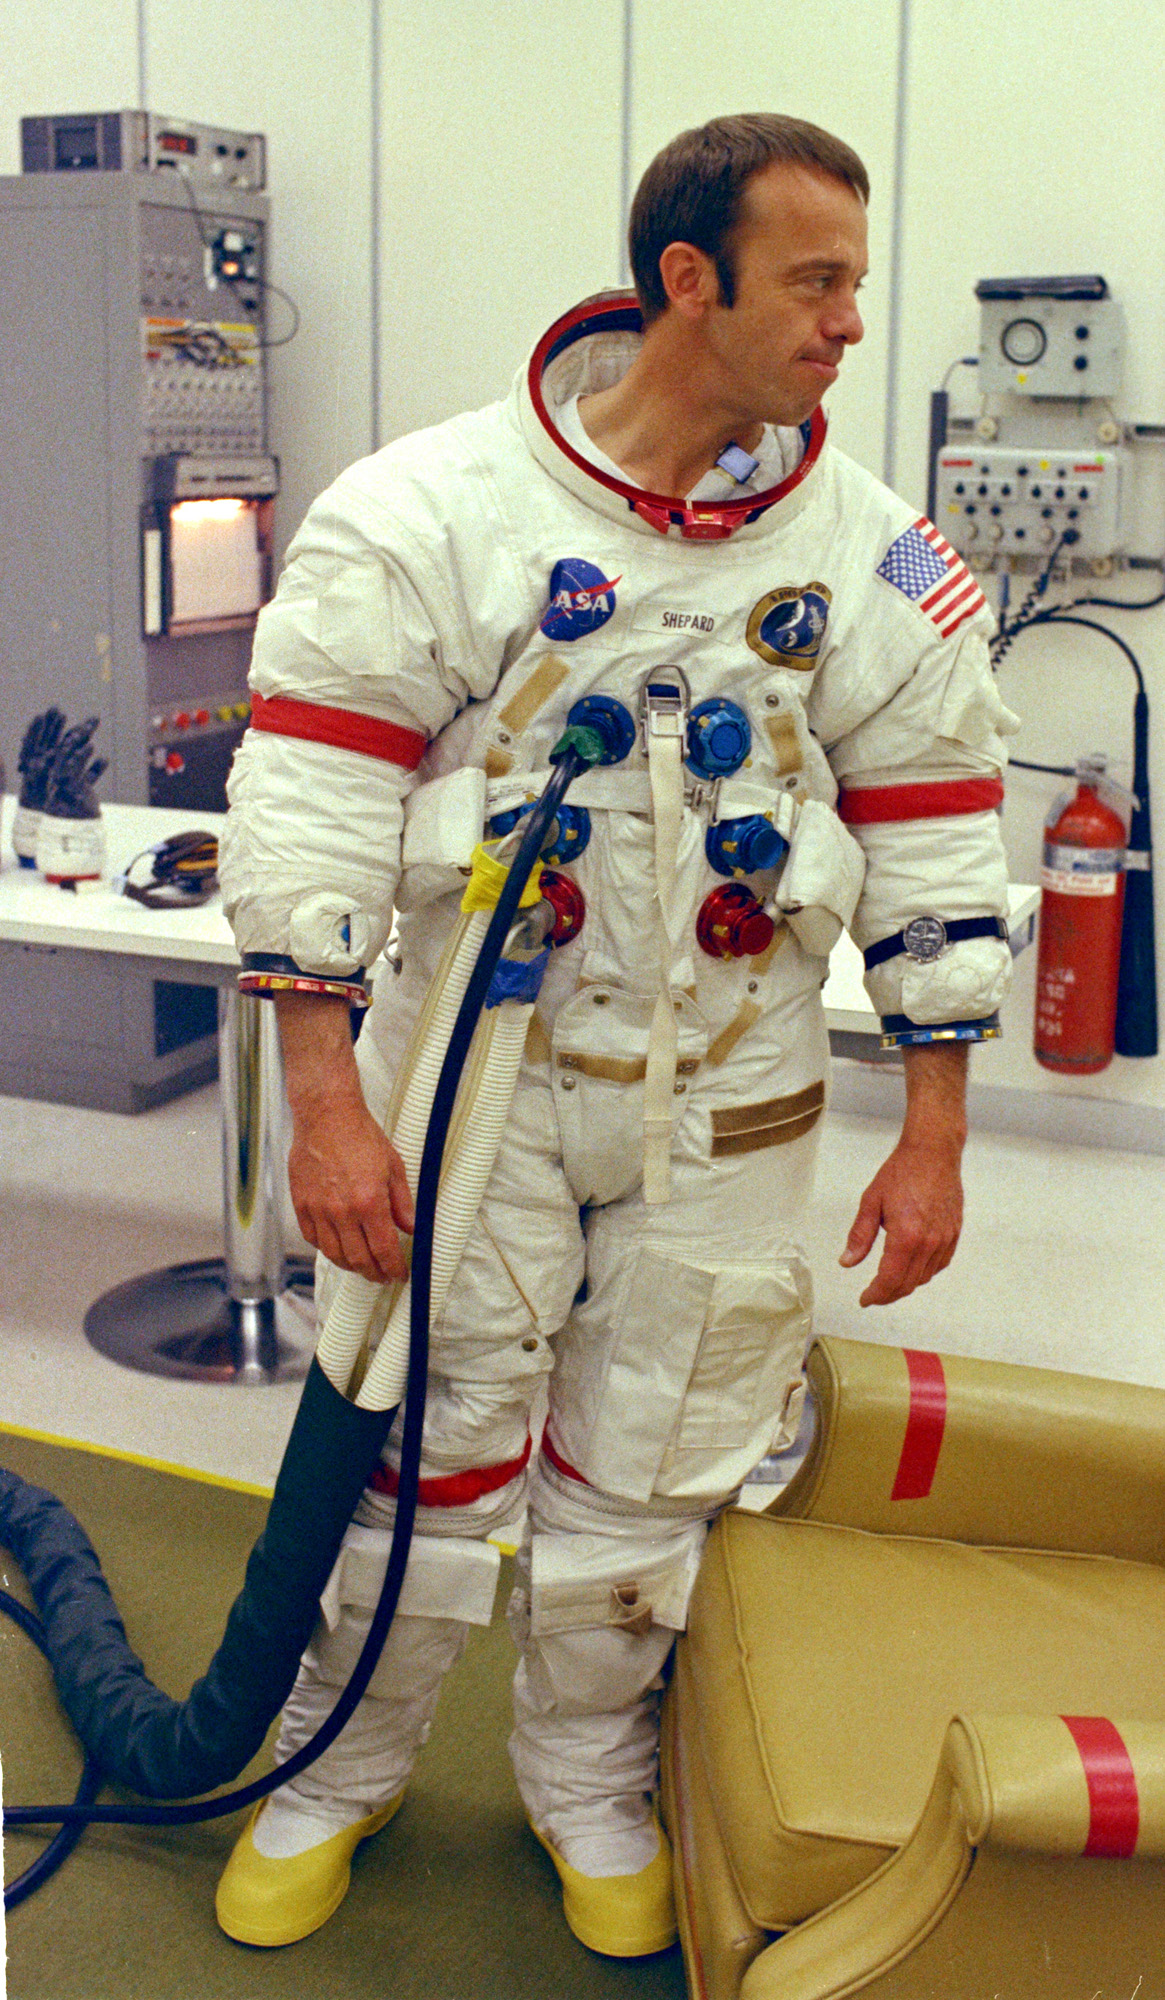 The Evolution of the Space Suit